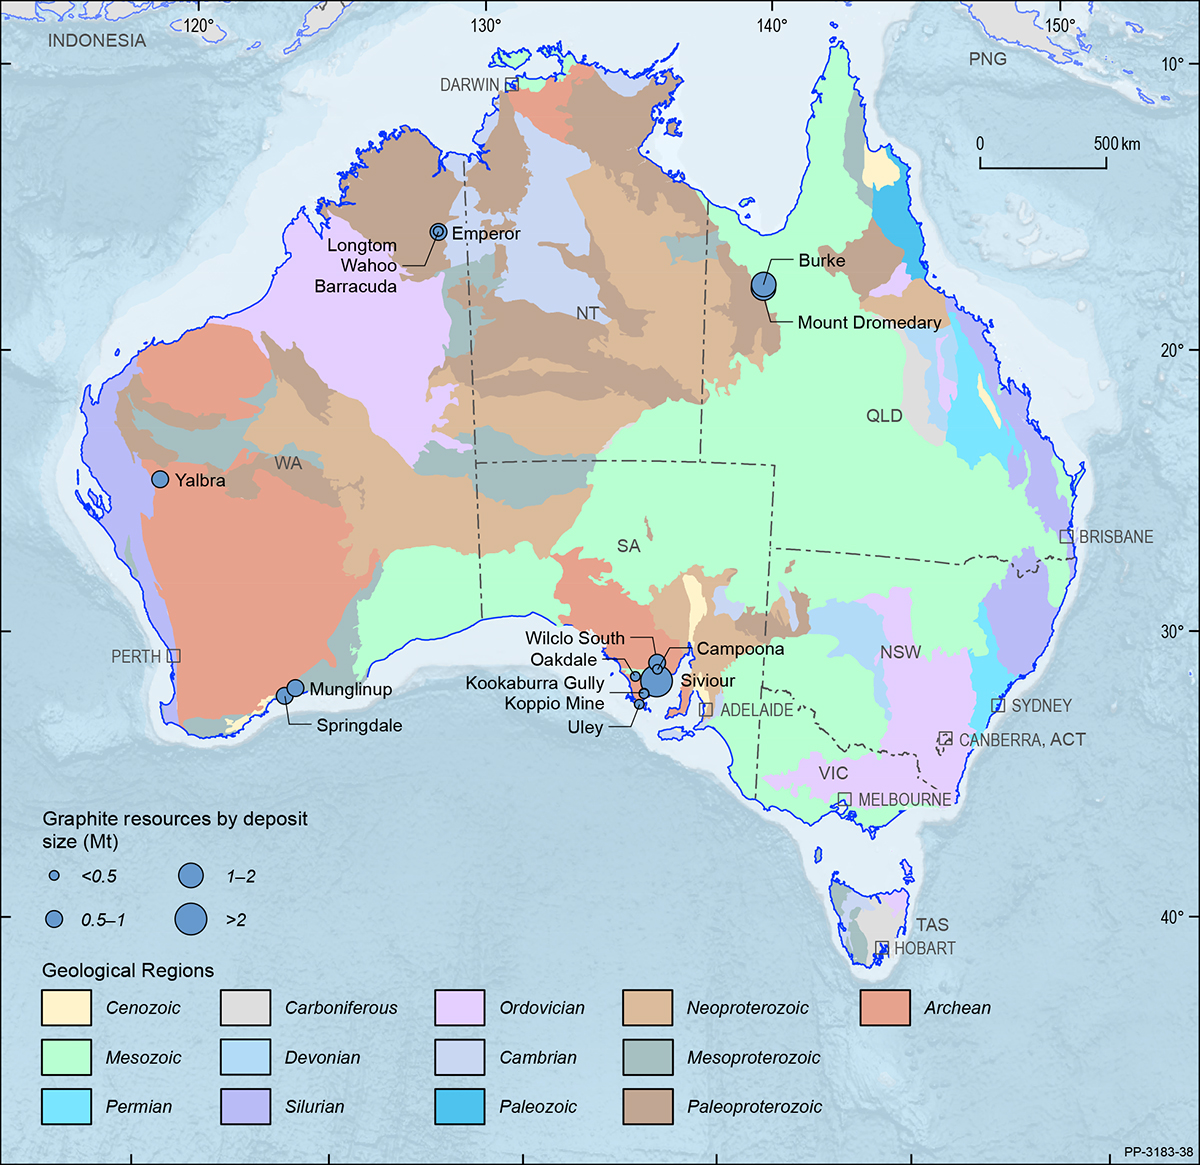 A map showing the Australian continent shaded by the ages of the main geological provinces highlighting the geographical distribution of Australian graphite deposits in 2019.